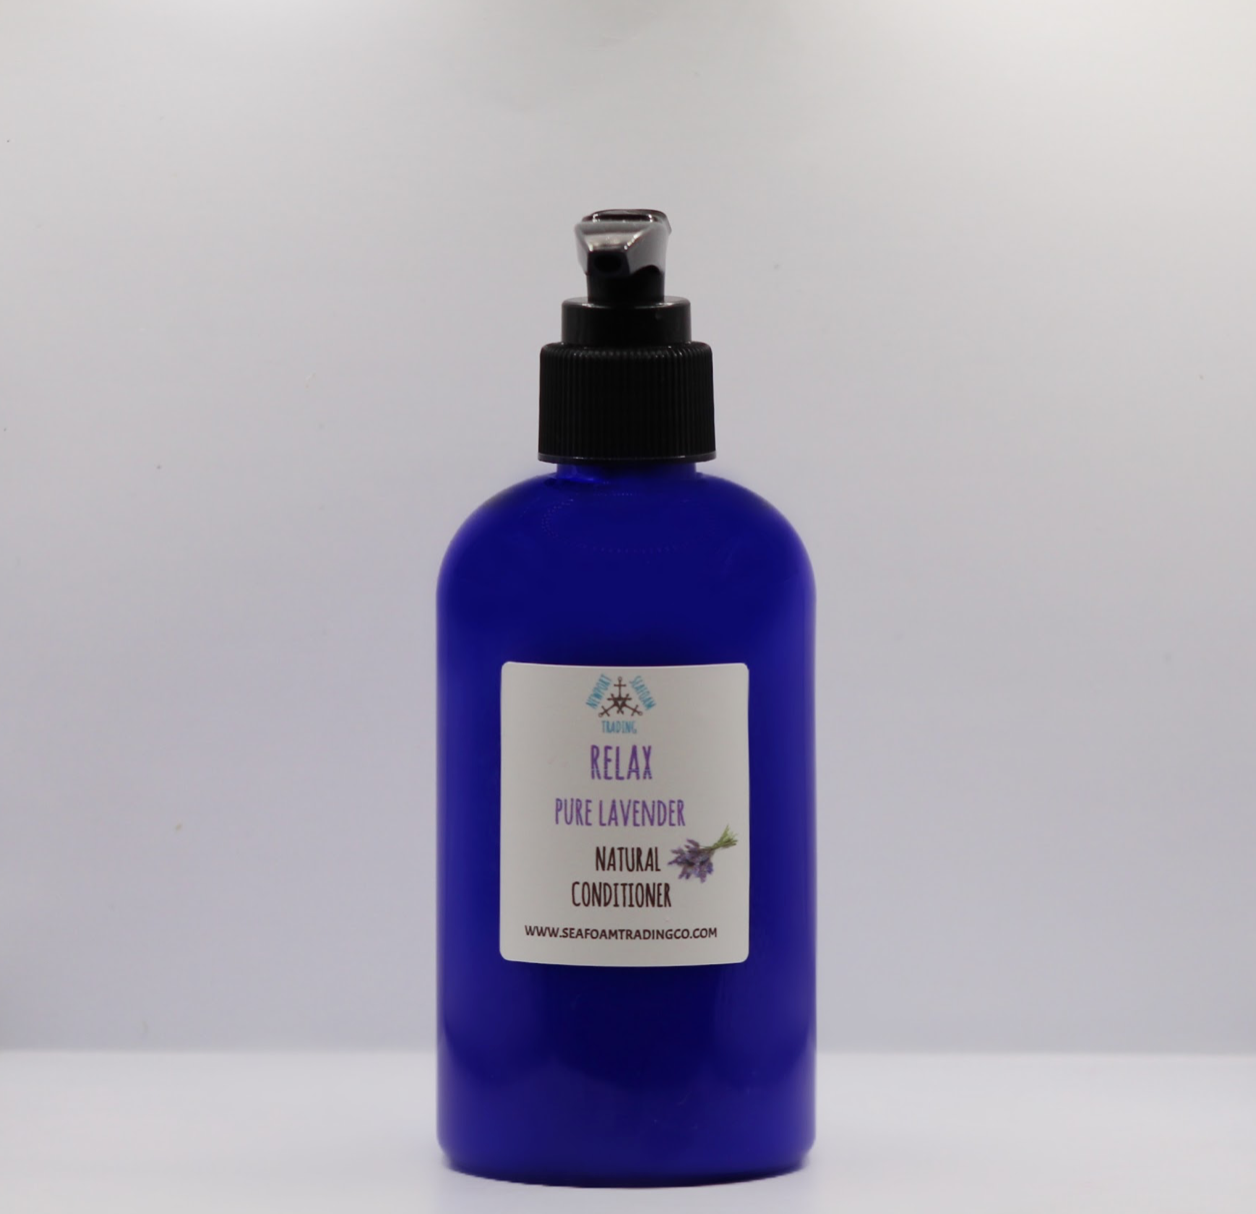 Relax - Pure Lavender Natural Conditioner